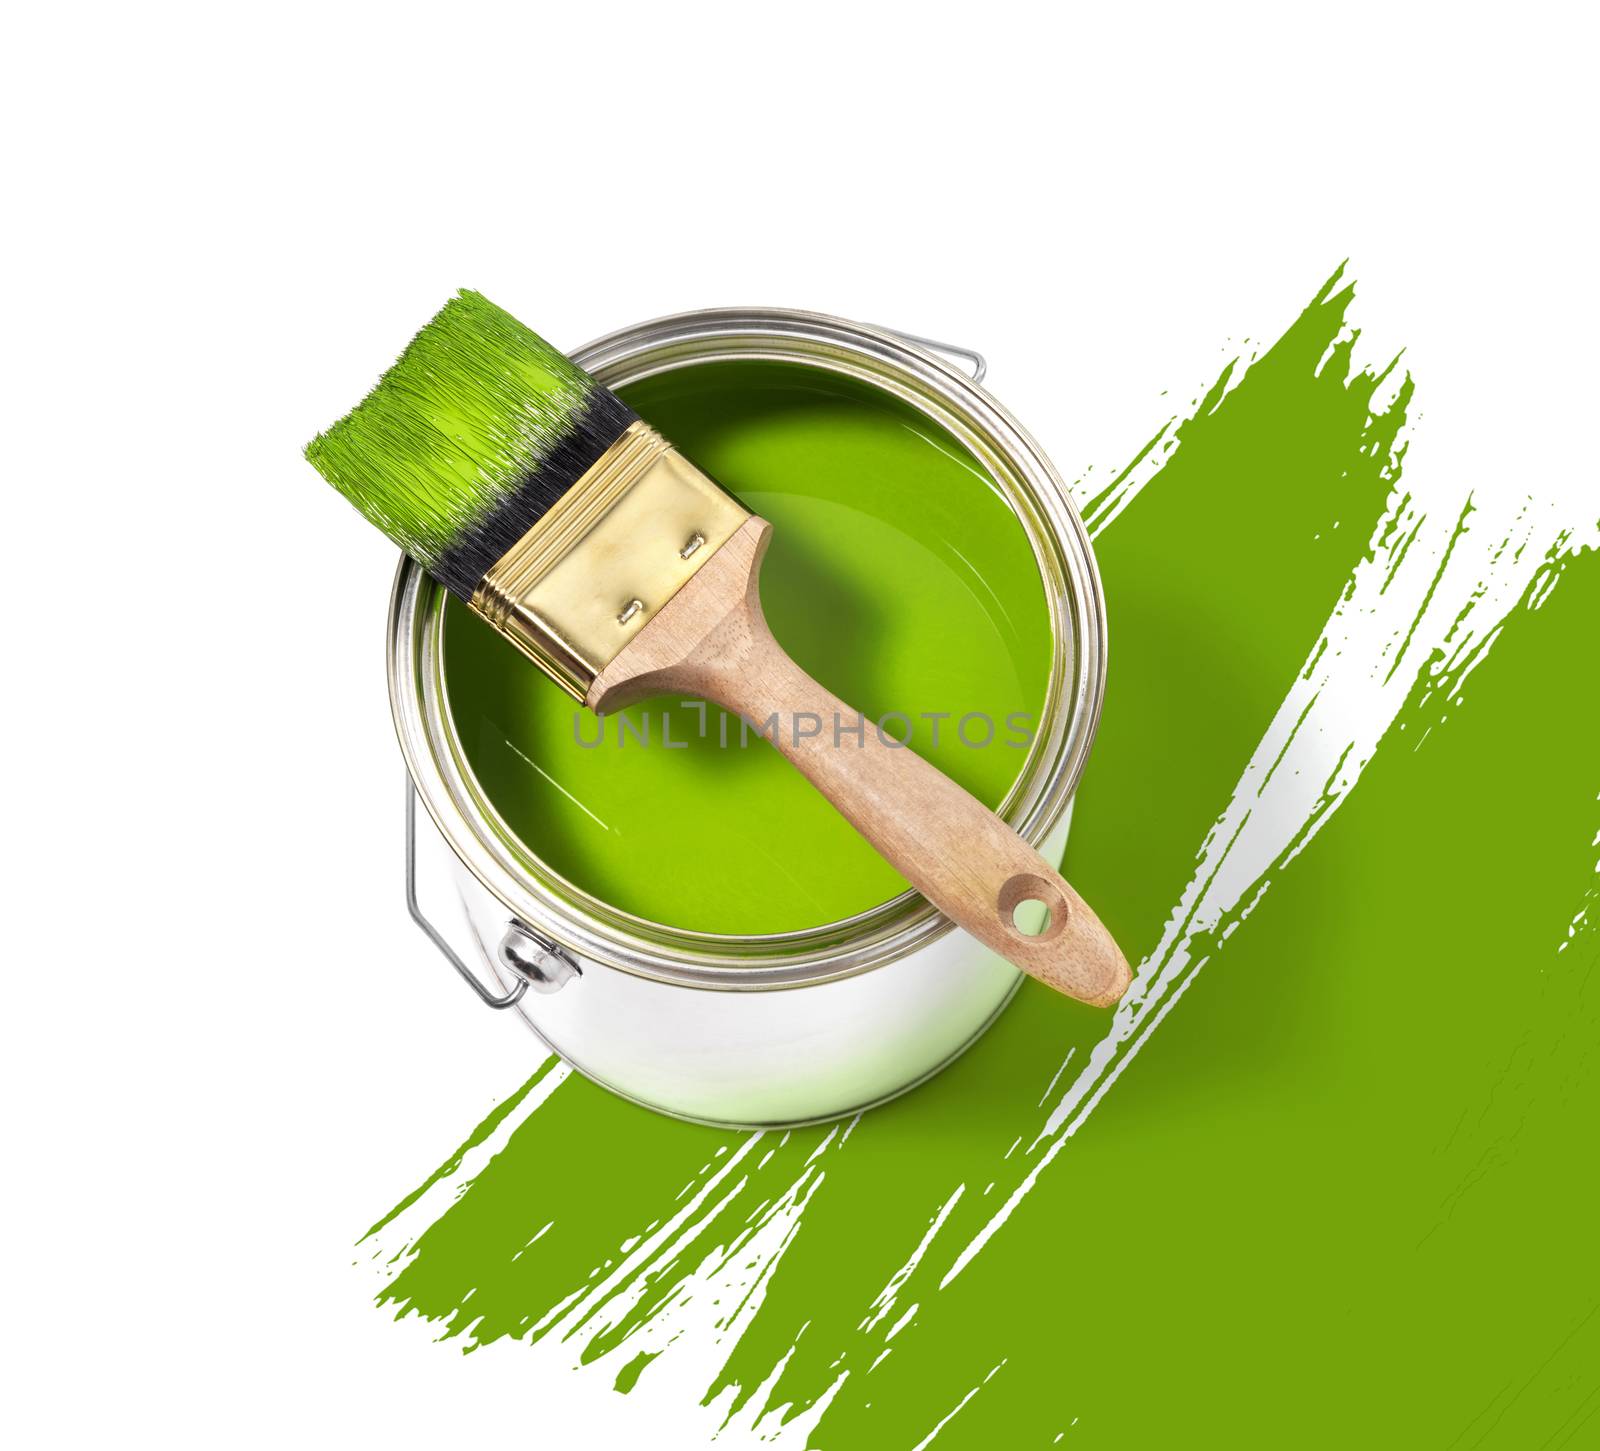 Green paint tin can with brush on top on a white background with green strokes